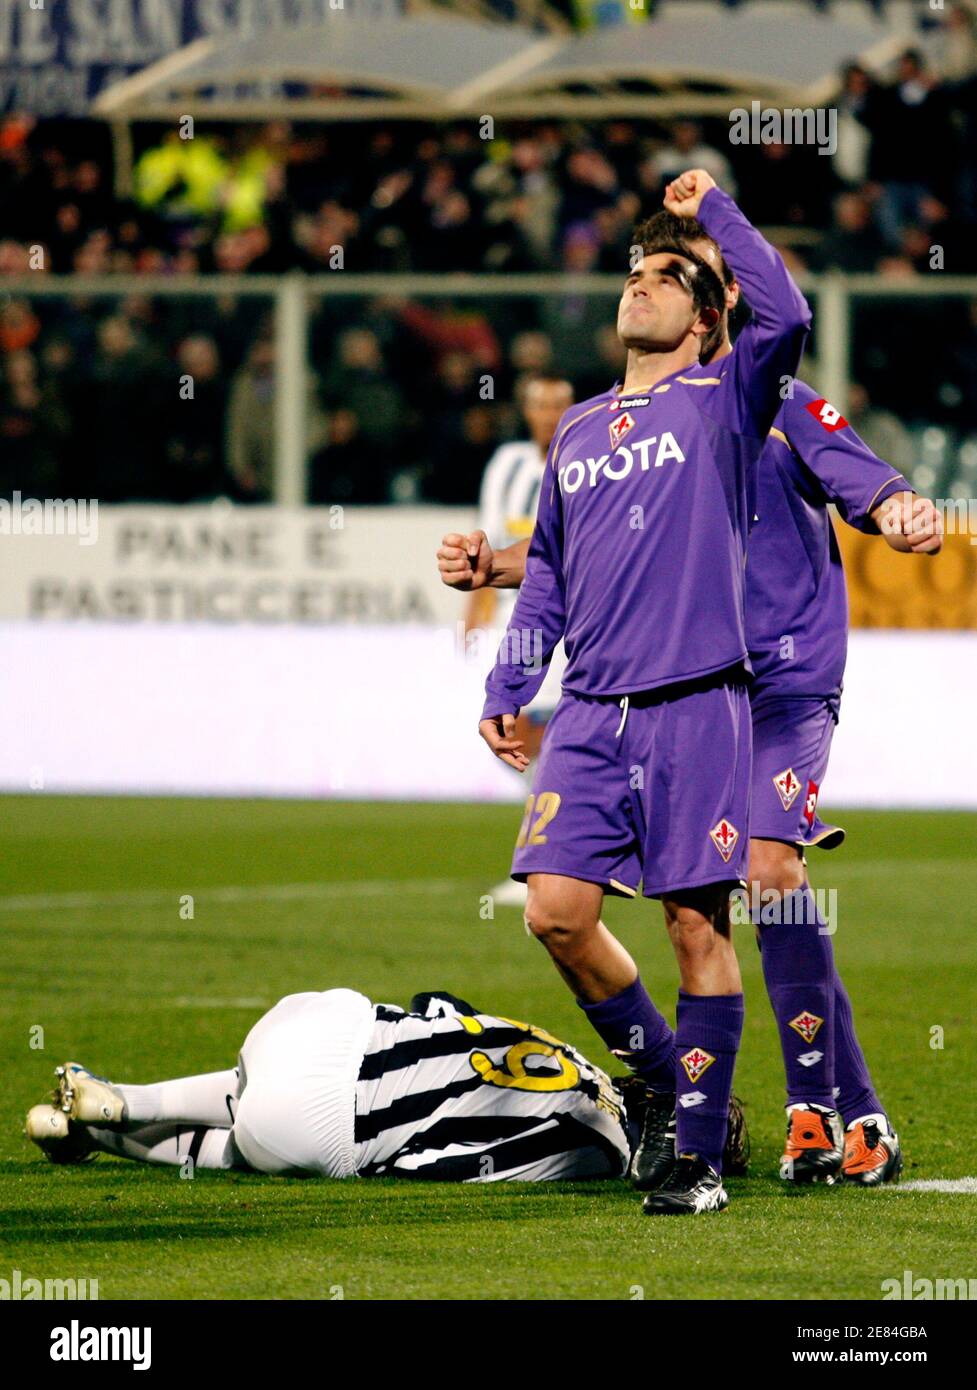 Fiorentina's Marco Marchionni (R) celebrates after scoring as Juventus' Paolo De Ceglie (bottom) lies on the field during their Italian Serie A soccer match at the Artemio Franchi stadium in Florence March 6, 2010.     REUTERS/Giampiero Sposito (ITALY - Tags: SPORT SOCCER) Stock Photo